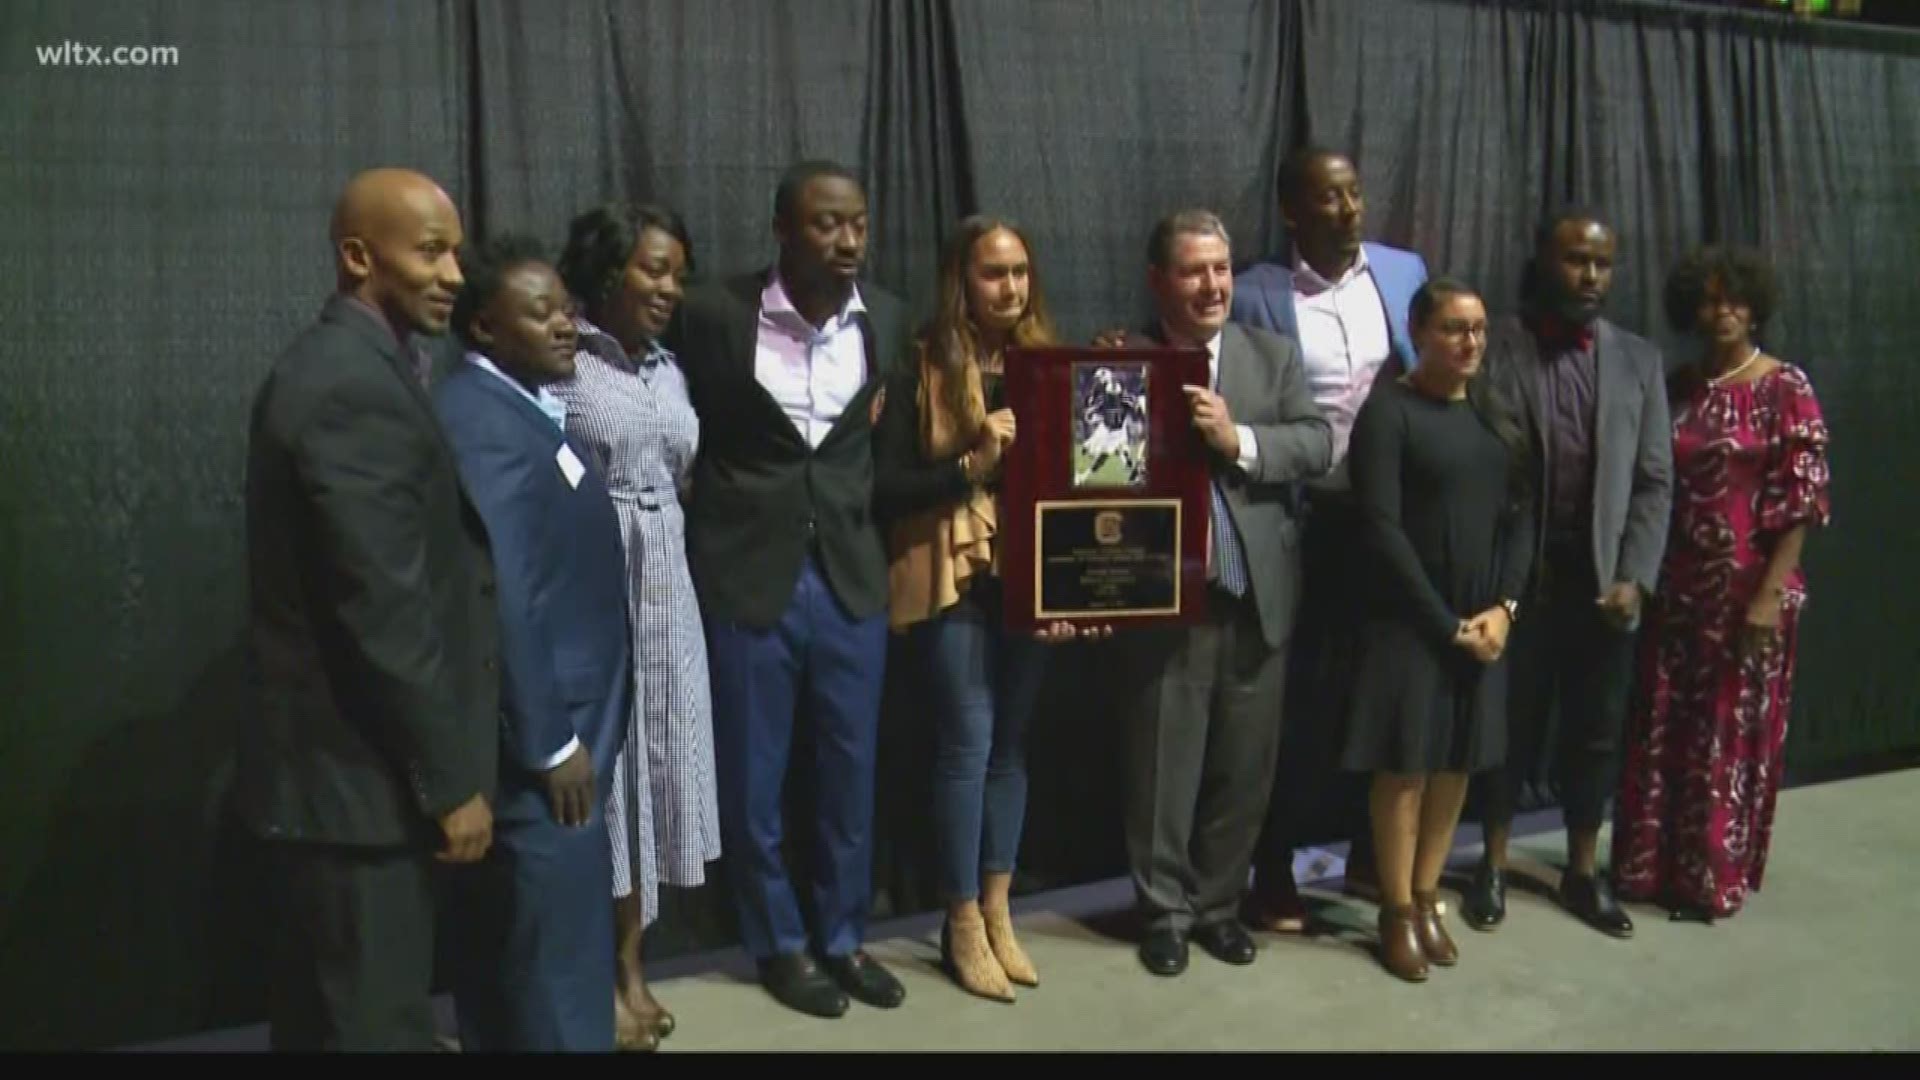 Former Gamecock running back Marcus Lattimore was one of nine former USC athletes who were inducted into the school's athletics hall of fame.